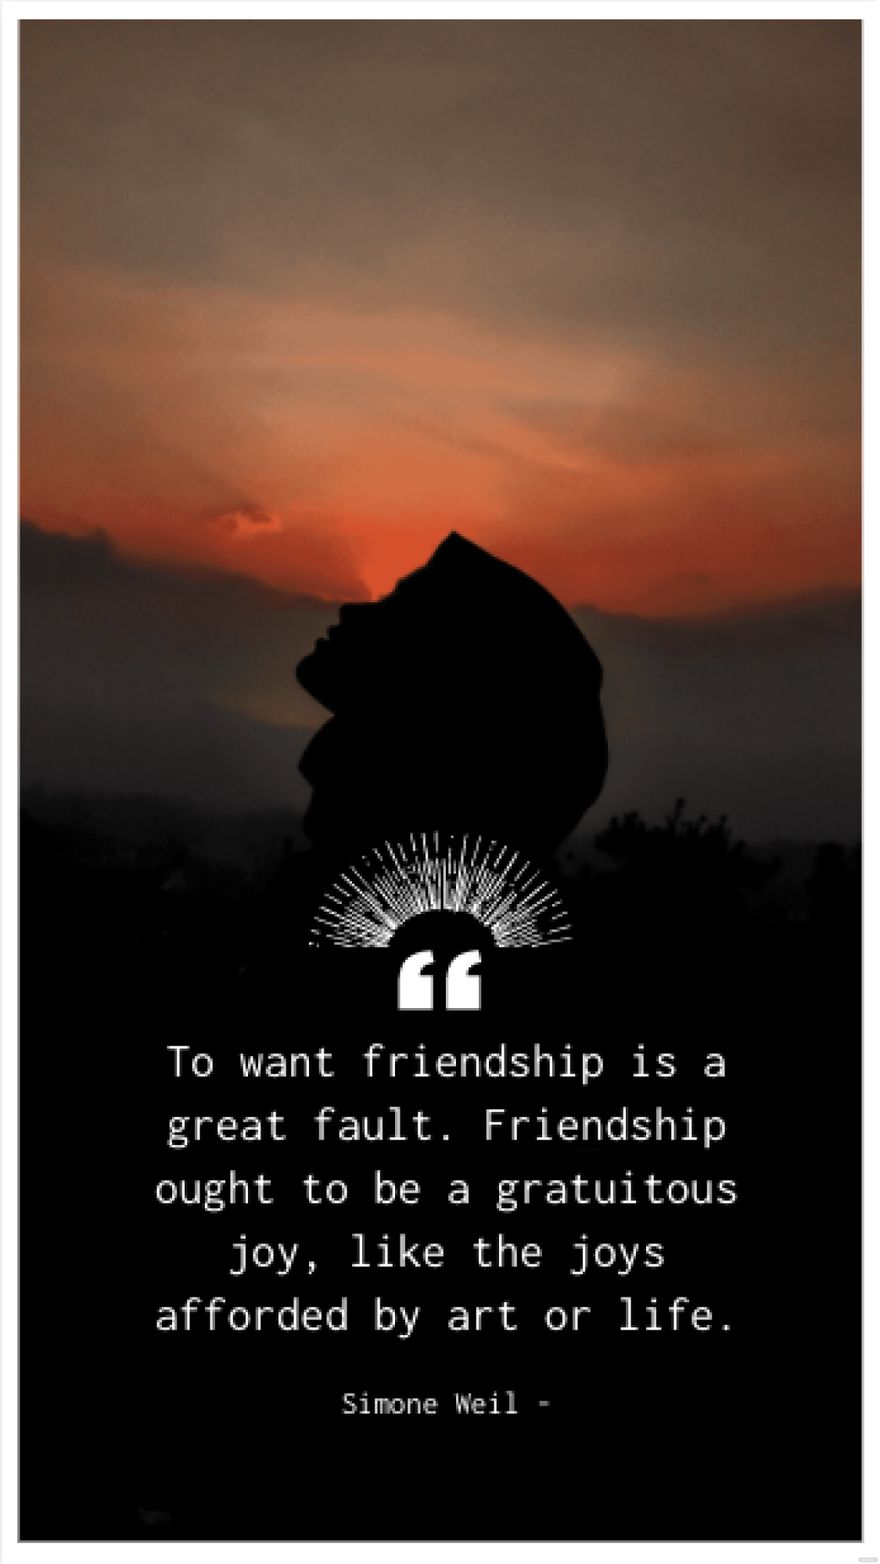 Free Simone Weil - To want friendship is a great fault. Friendship ought to be a gratuitous joy, like the joys afforded by art or life. in JPG